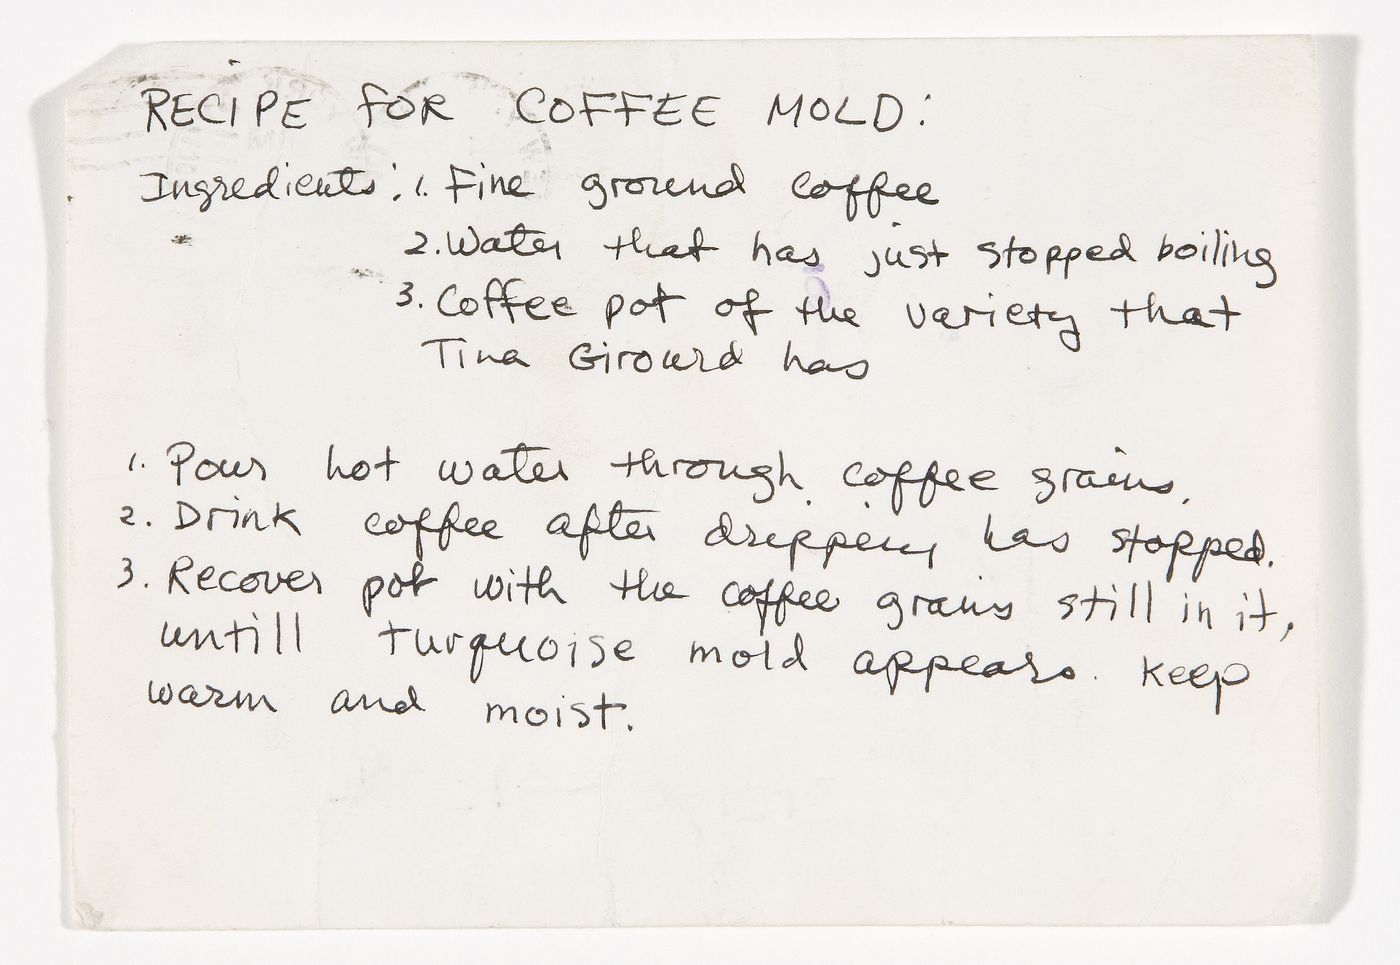 Recipe for Coffee Mold from Brenda Miller